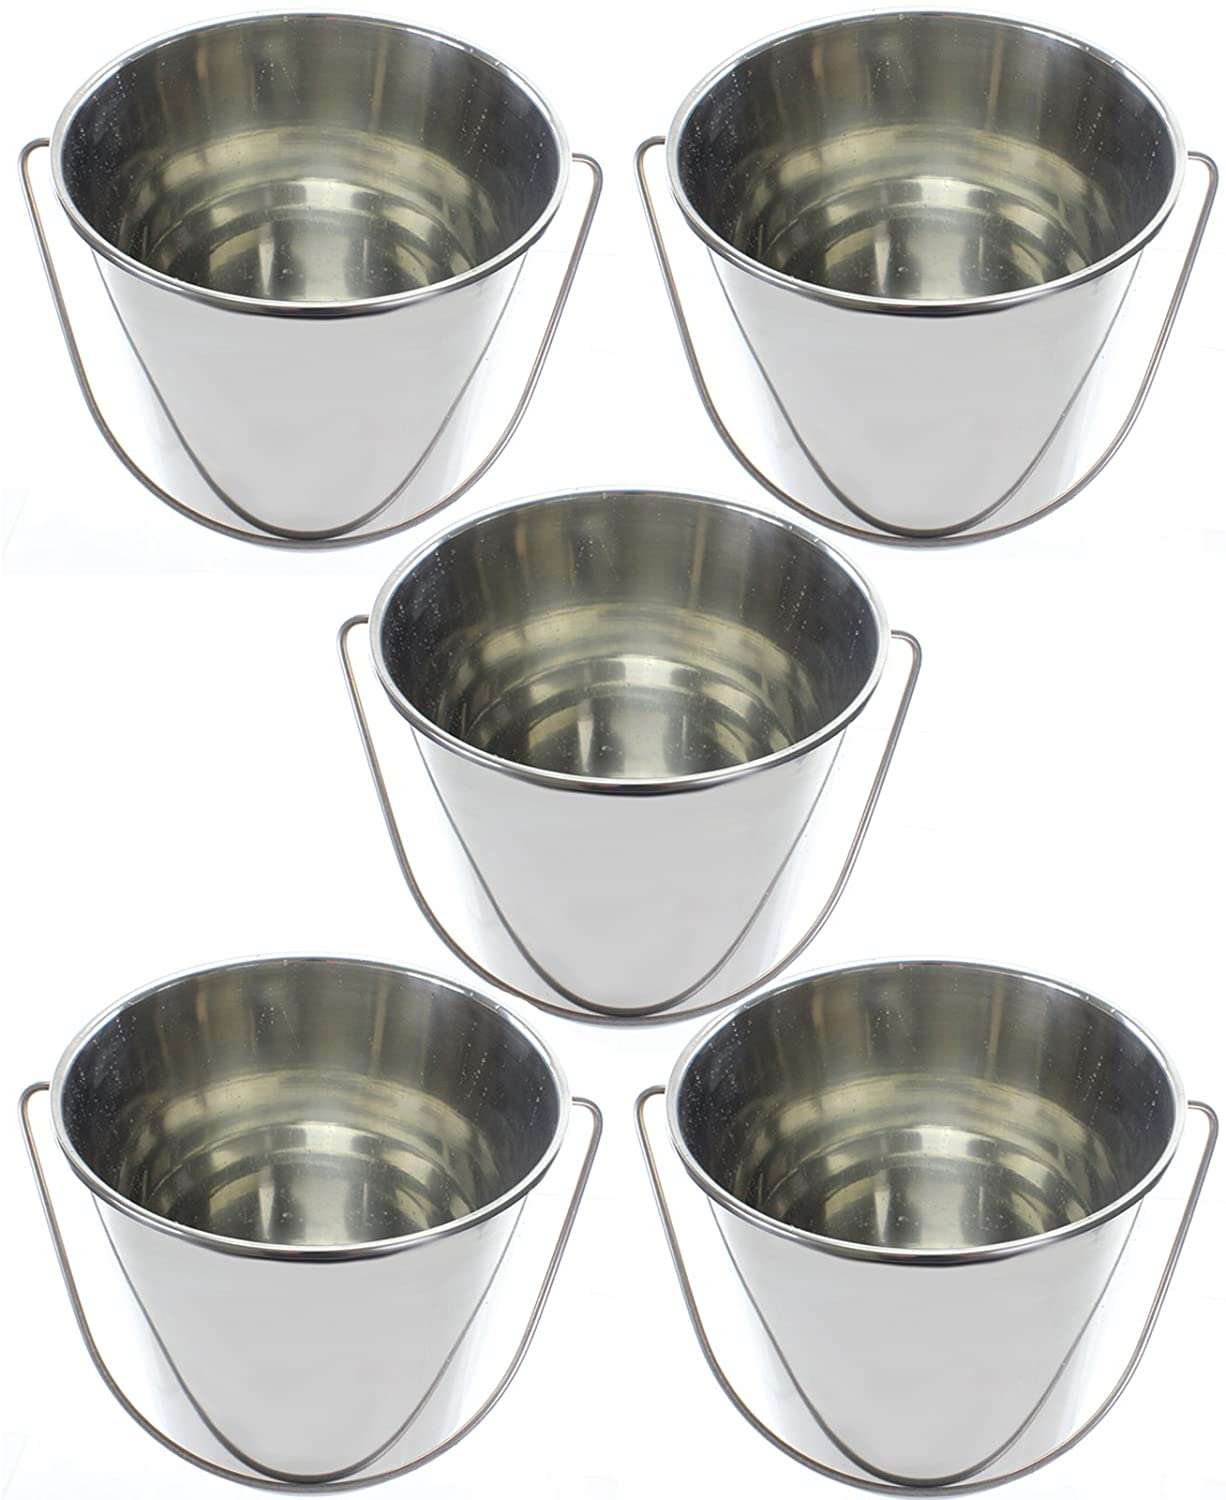 Champagne & Ice Bucket, Pack of 5 Buckets